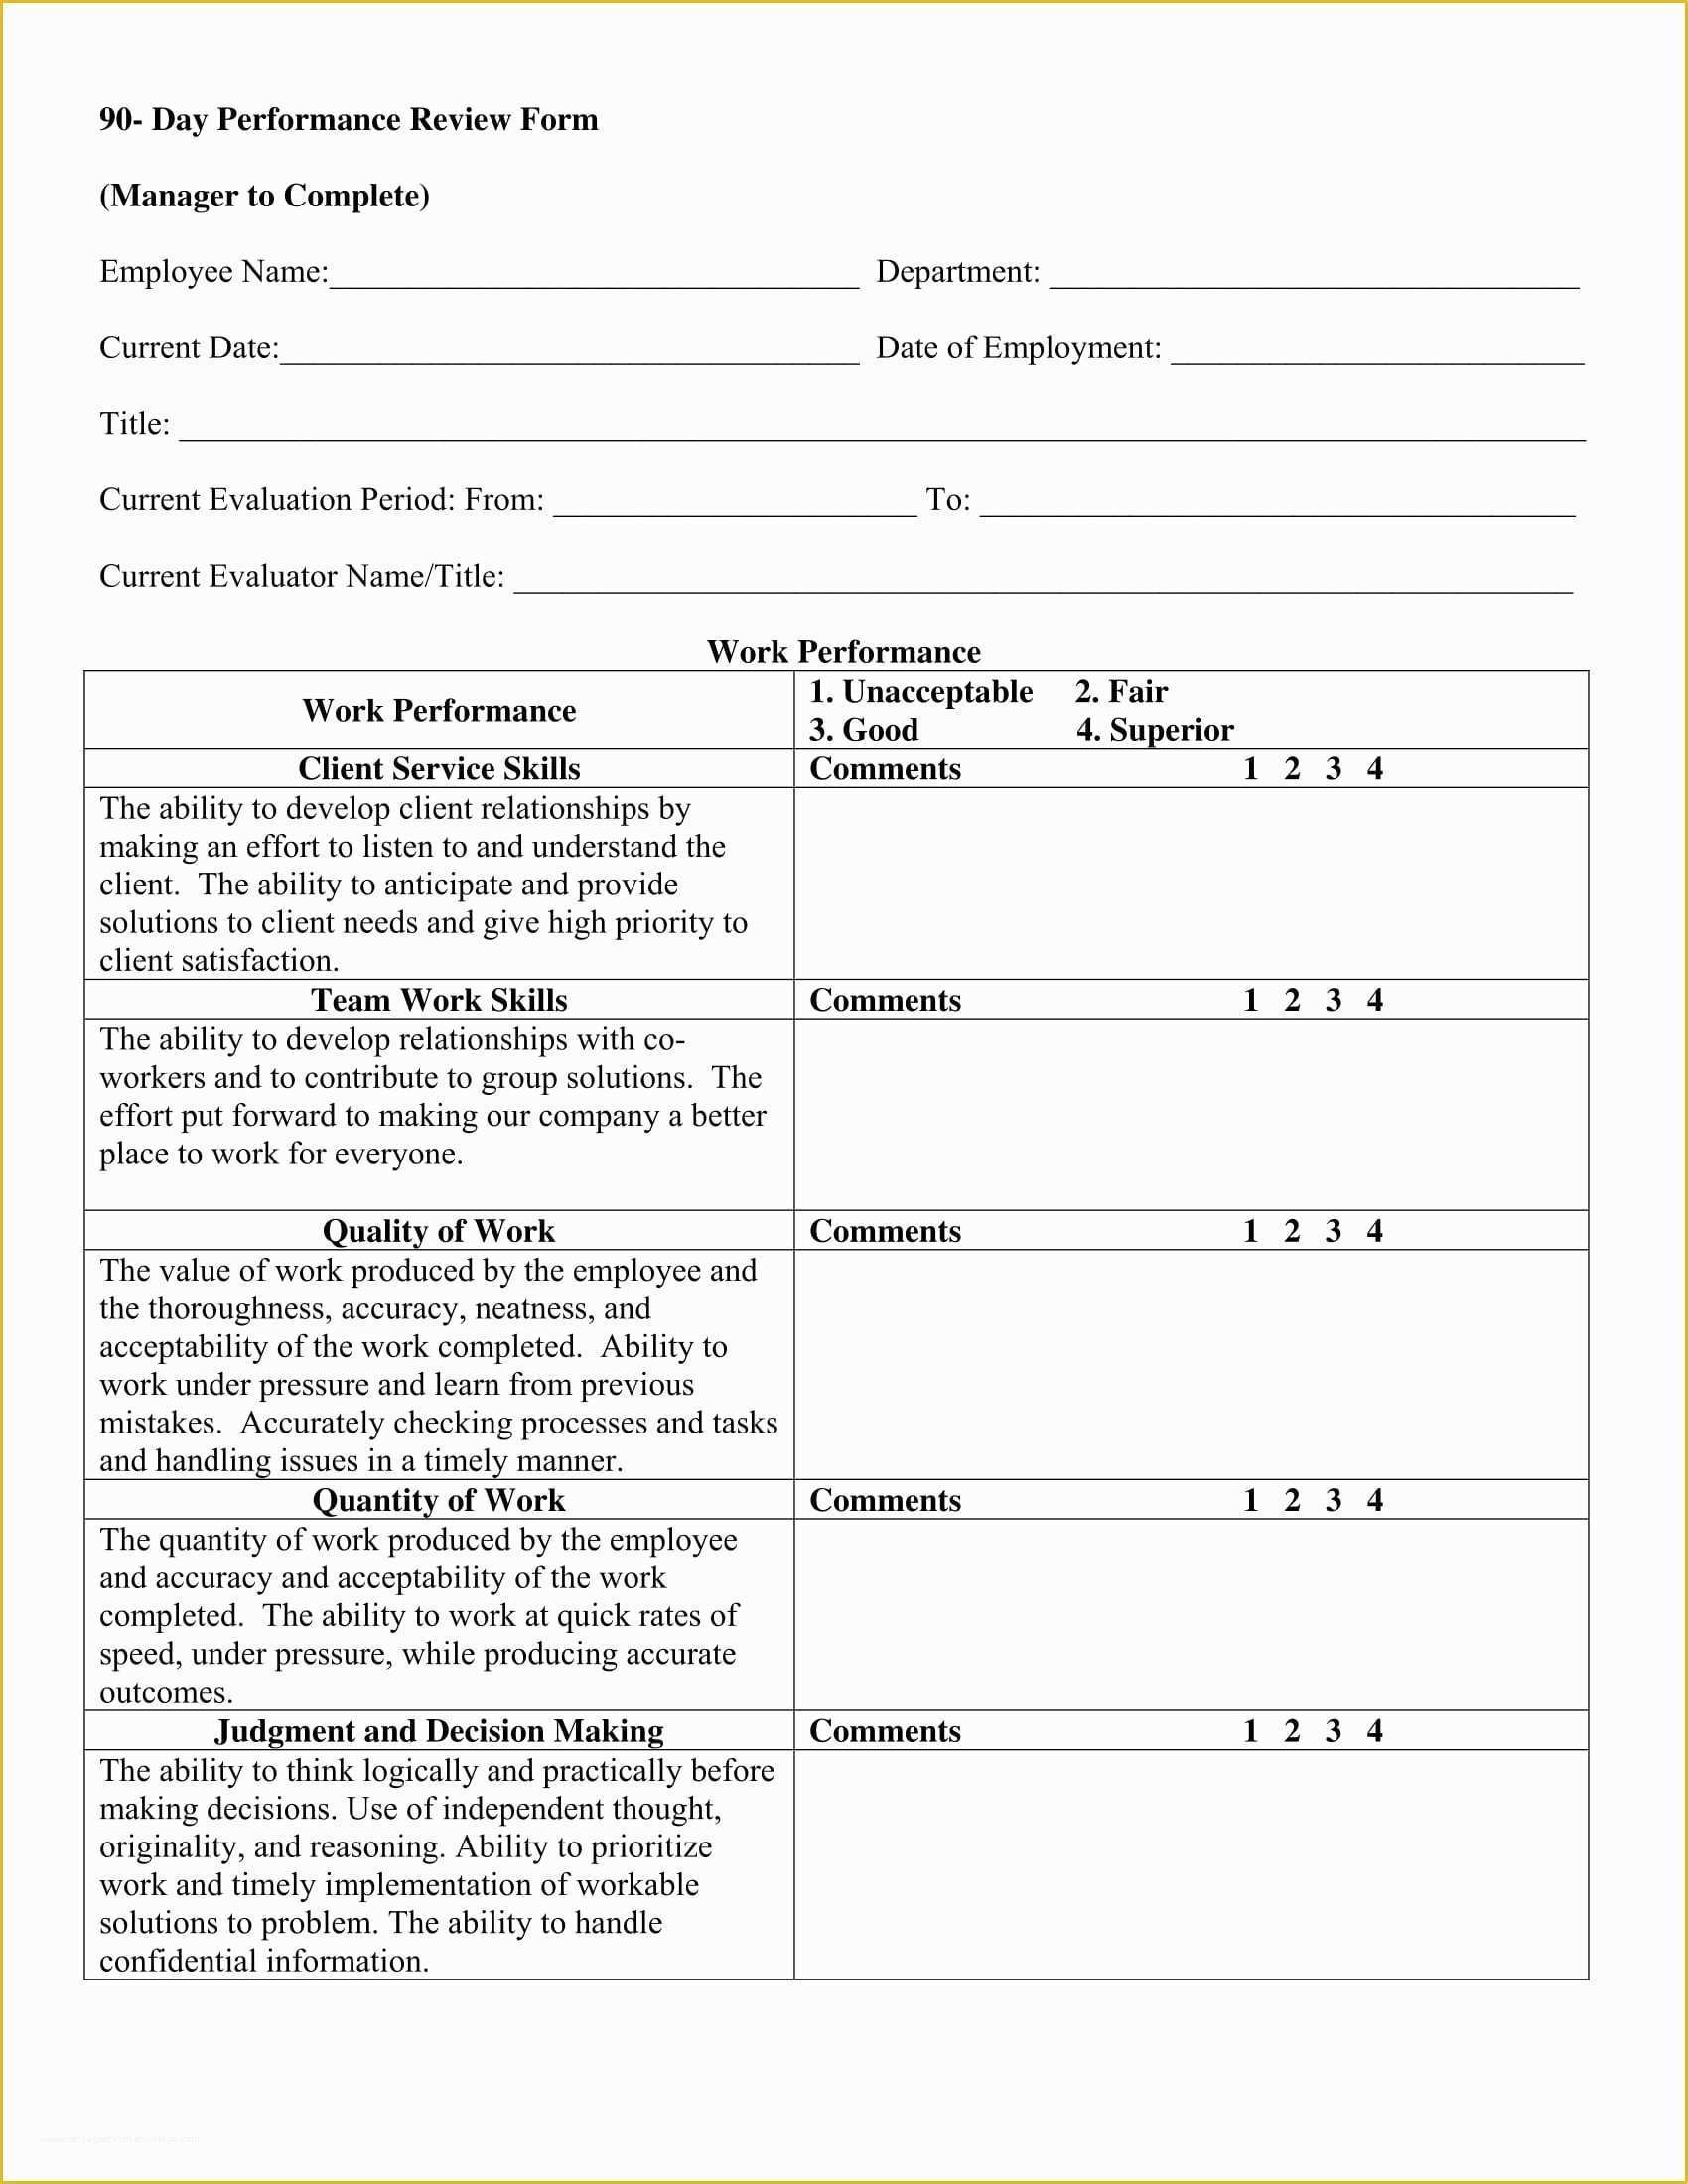 employee-review-form-template-free-of-14-90-day-review-forms-free-word